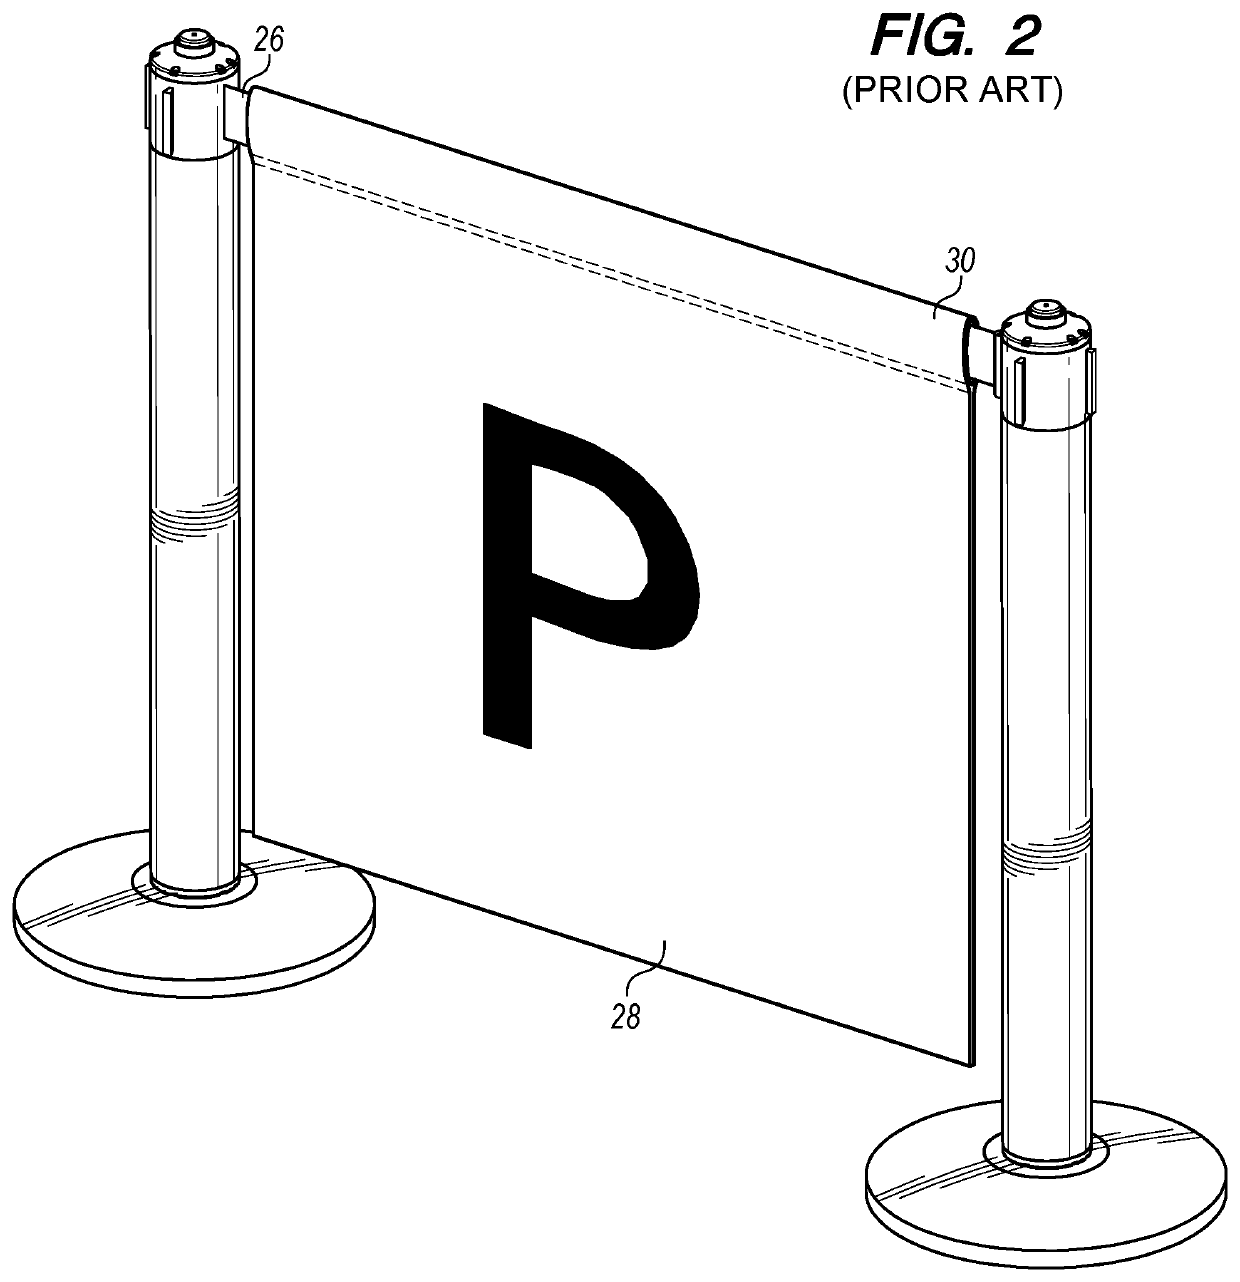 Retractable barrier assembly